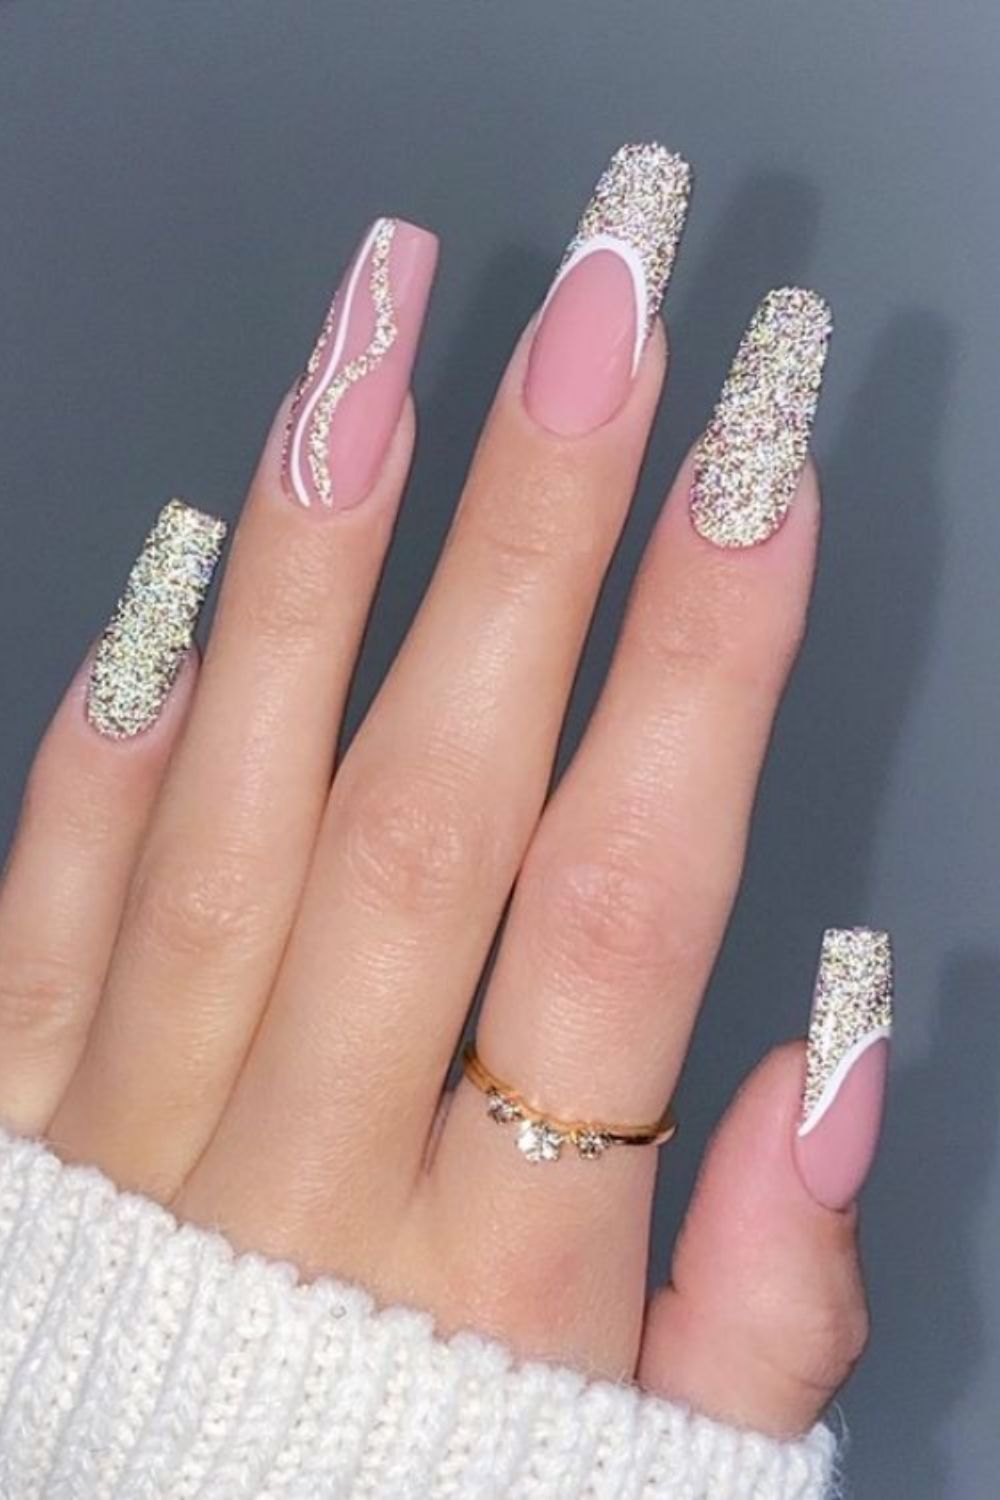 French coffin nails